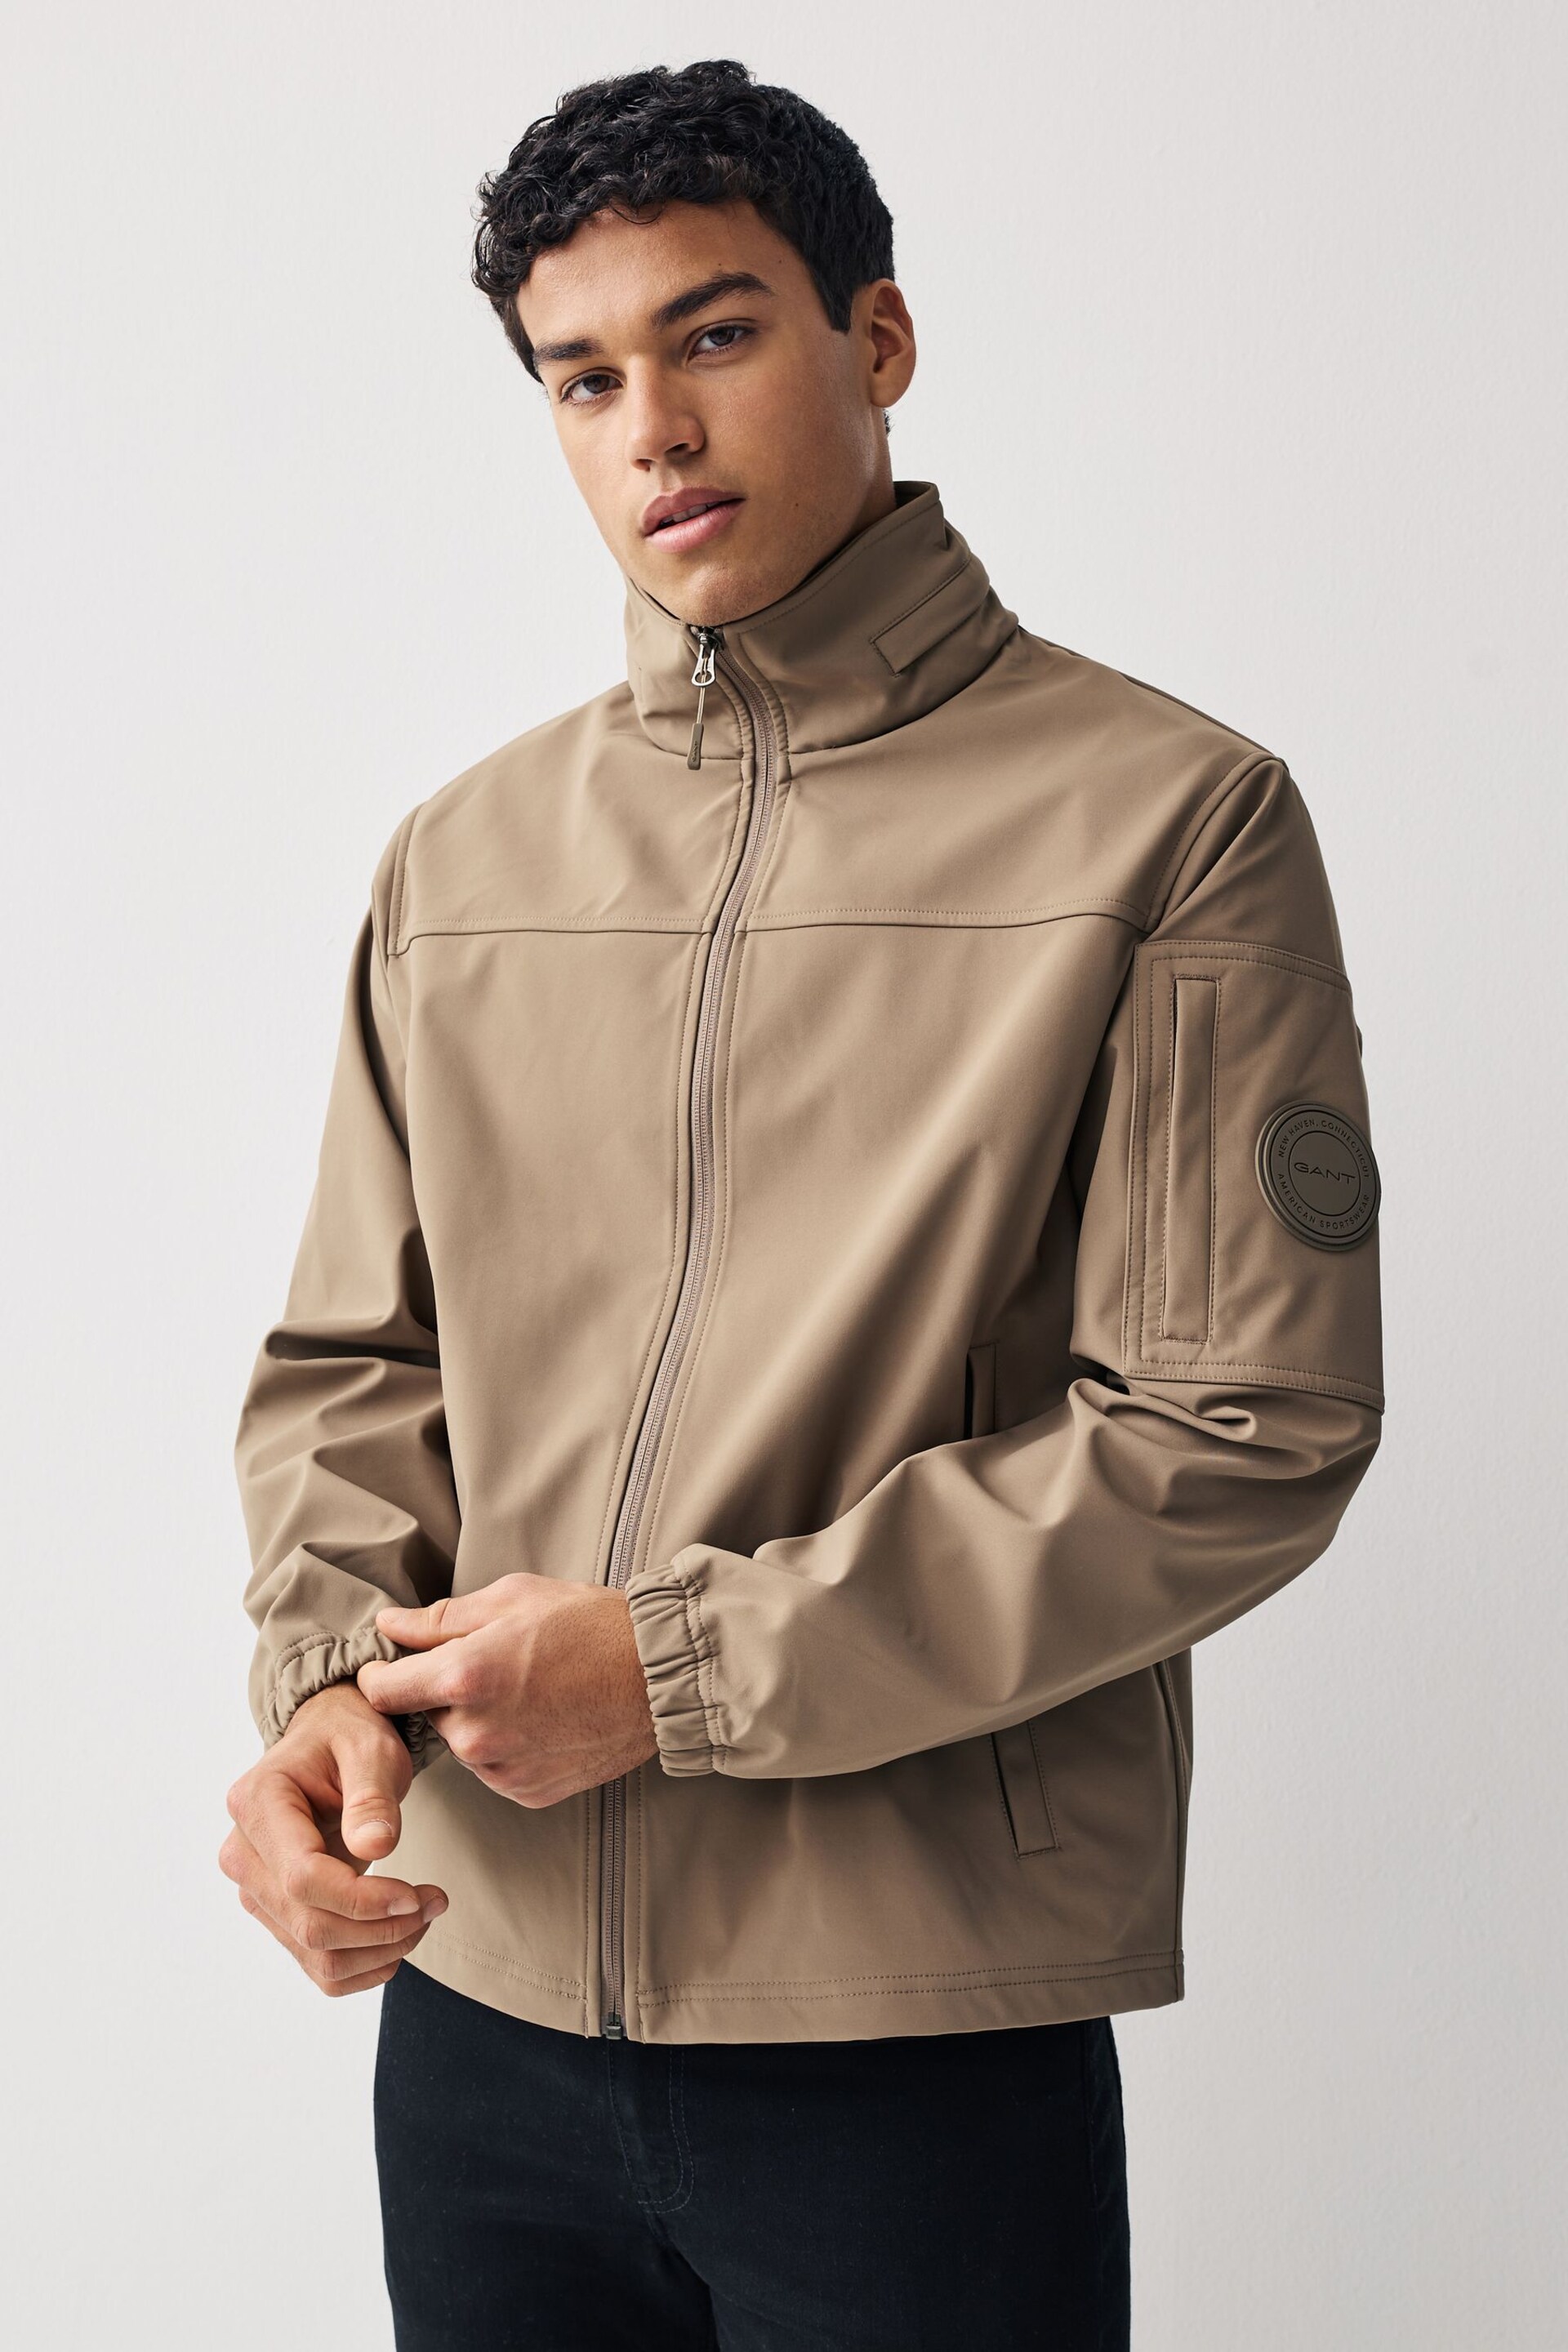 GANT Soft Shell Water Repellent Jacket - Image 1 of 8